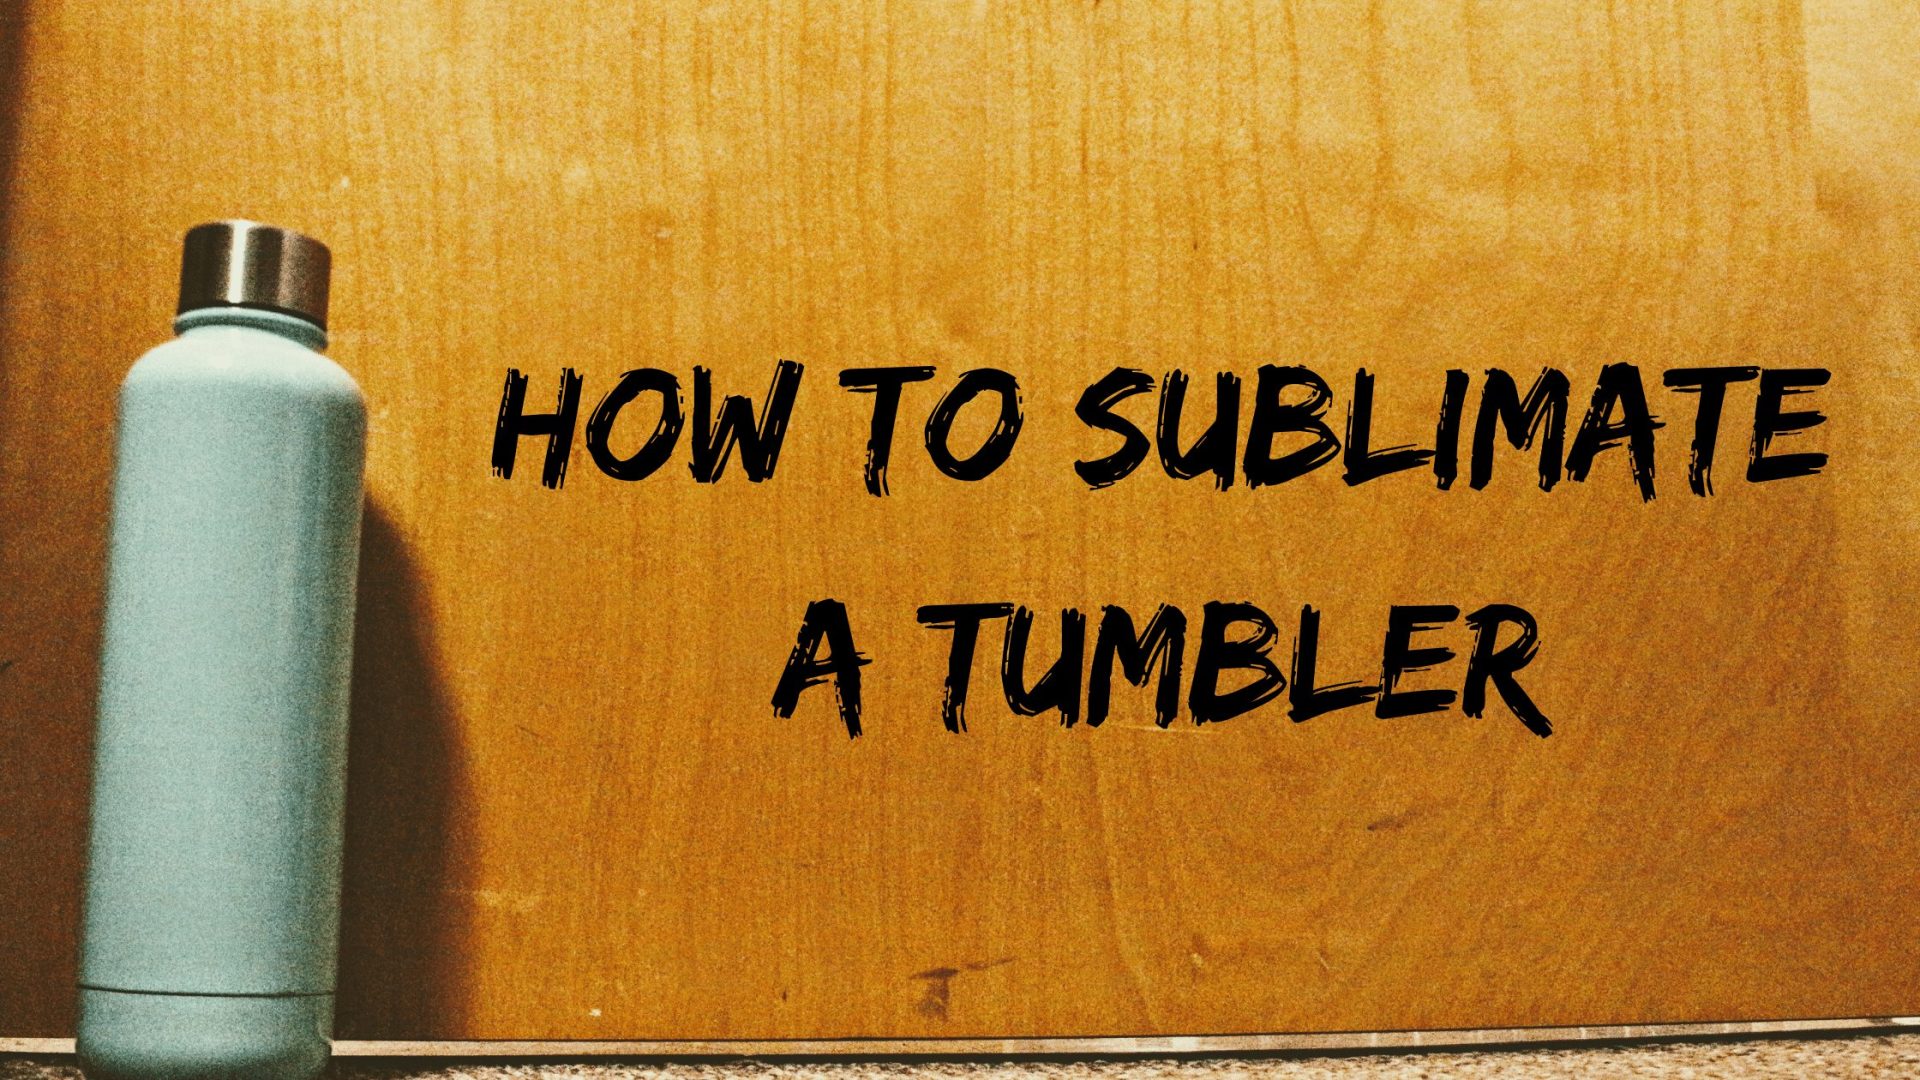 How to Sublimate a Tumbler